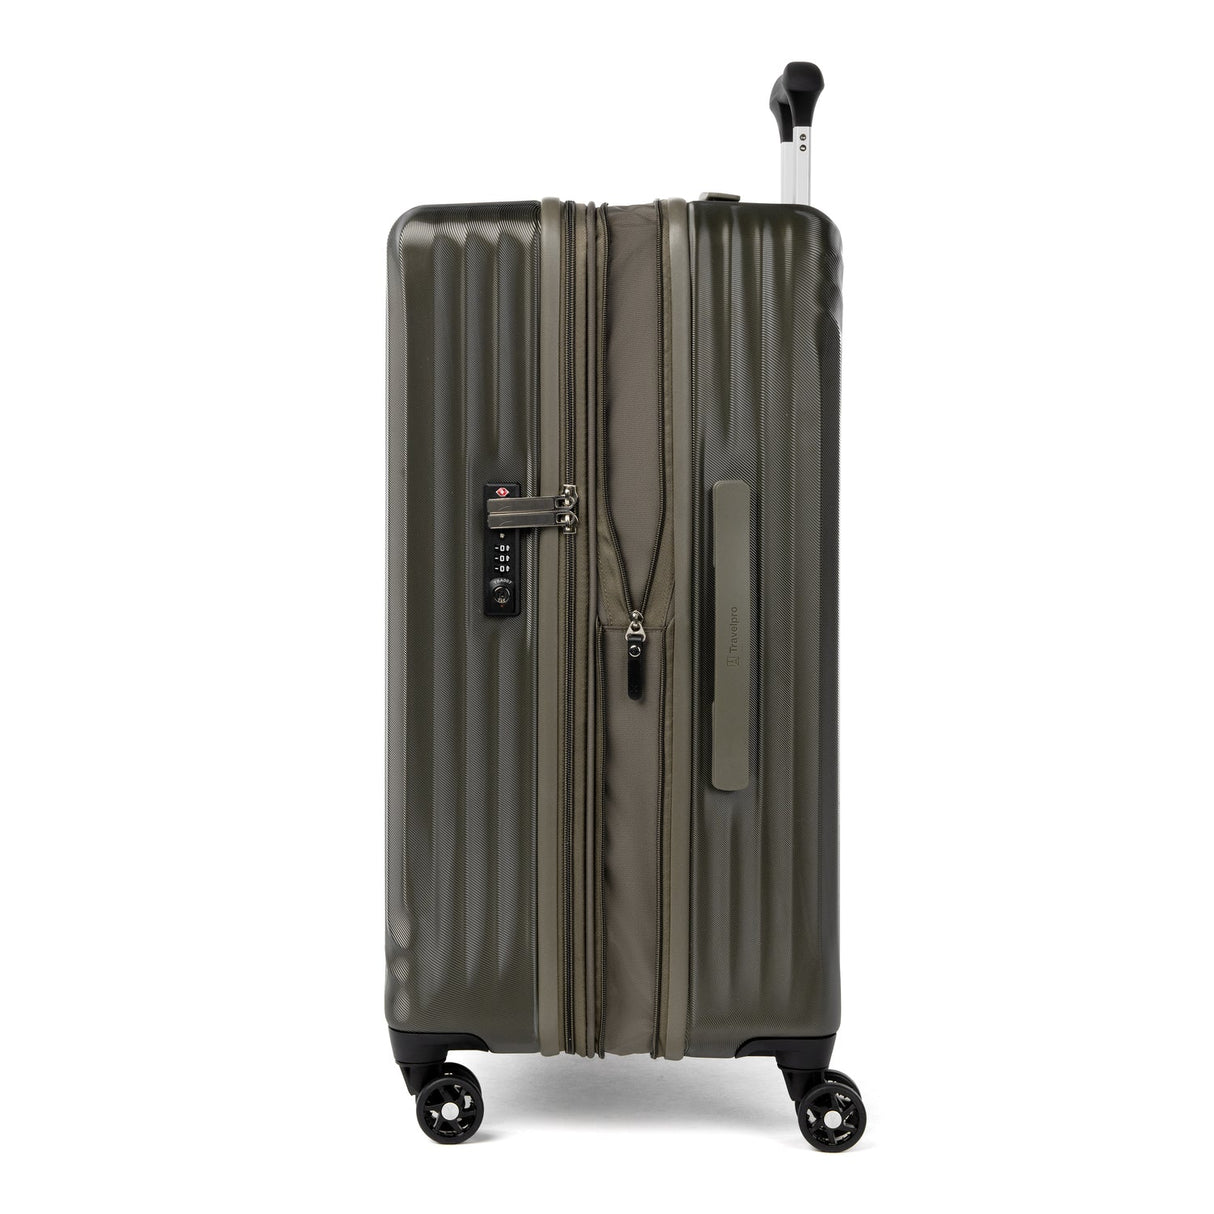 Travelpro Maxlite Air Medium Check-In Expandable Hardside Spinner , , 401229506_sideexpanded-1500x1500-d707c29_1024x1024_2x_dbf2b2f6-0d46-4740-9c09-d34c62796e7e